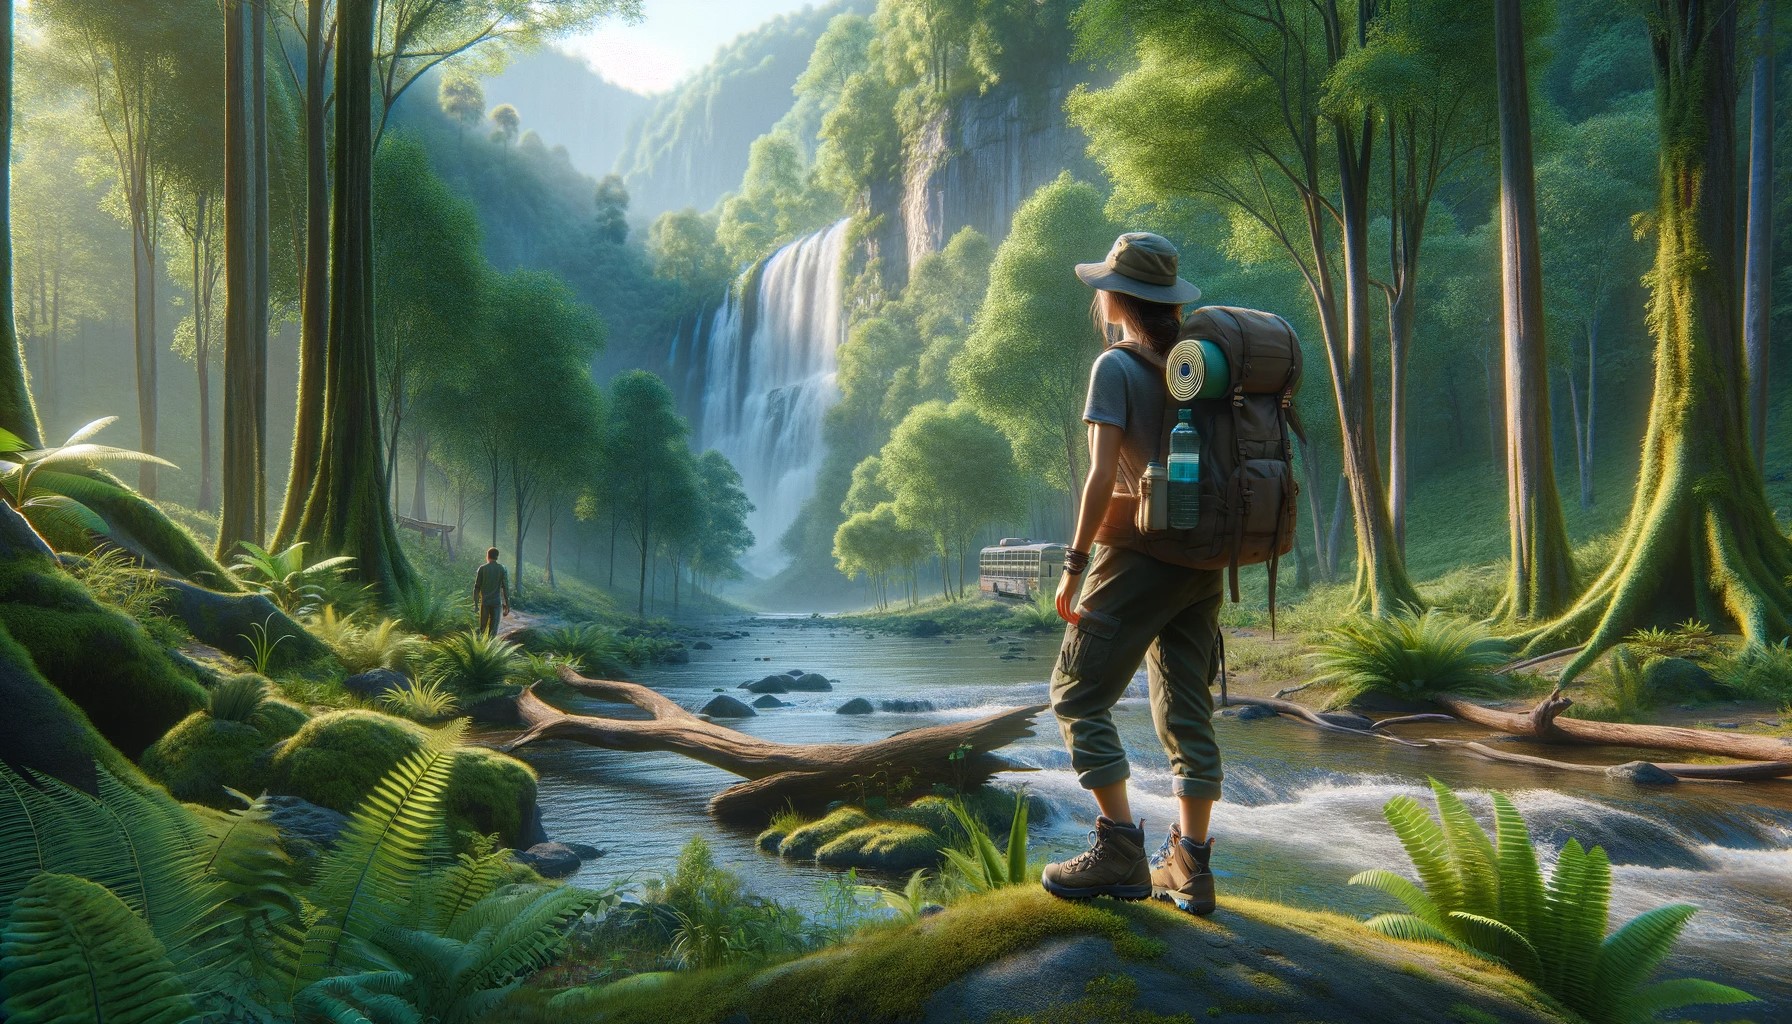 A realistic image of a female hiker standing near a river with a waterfall in the background. The setting is in a lush green forest with abundant tree